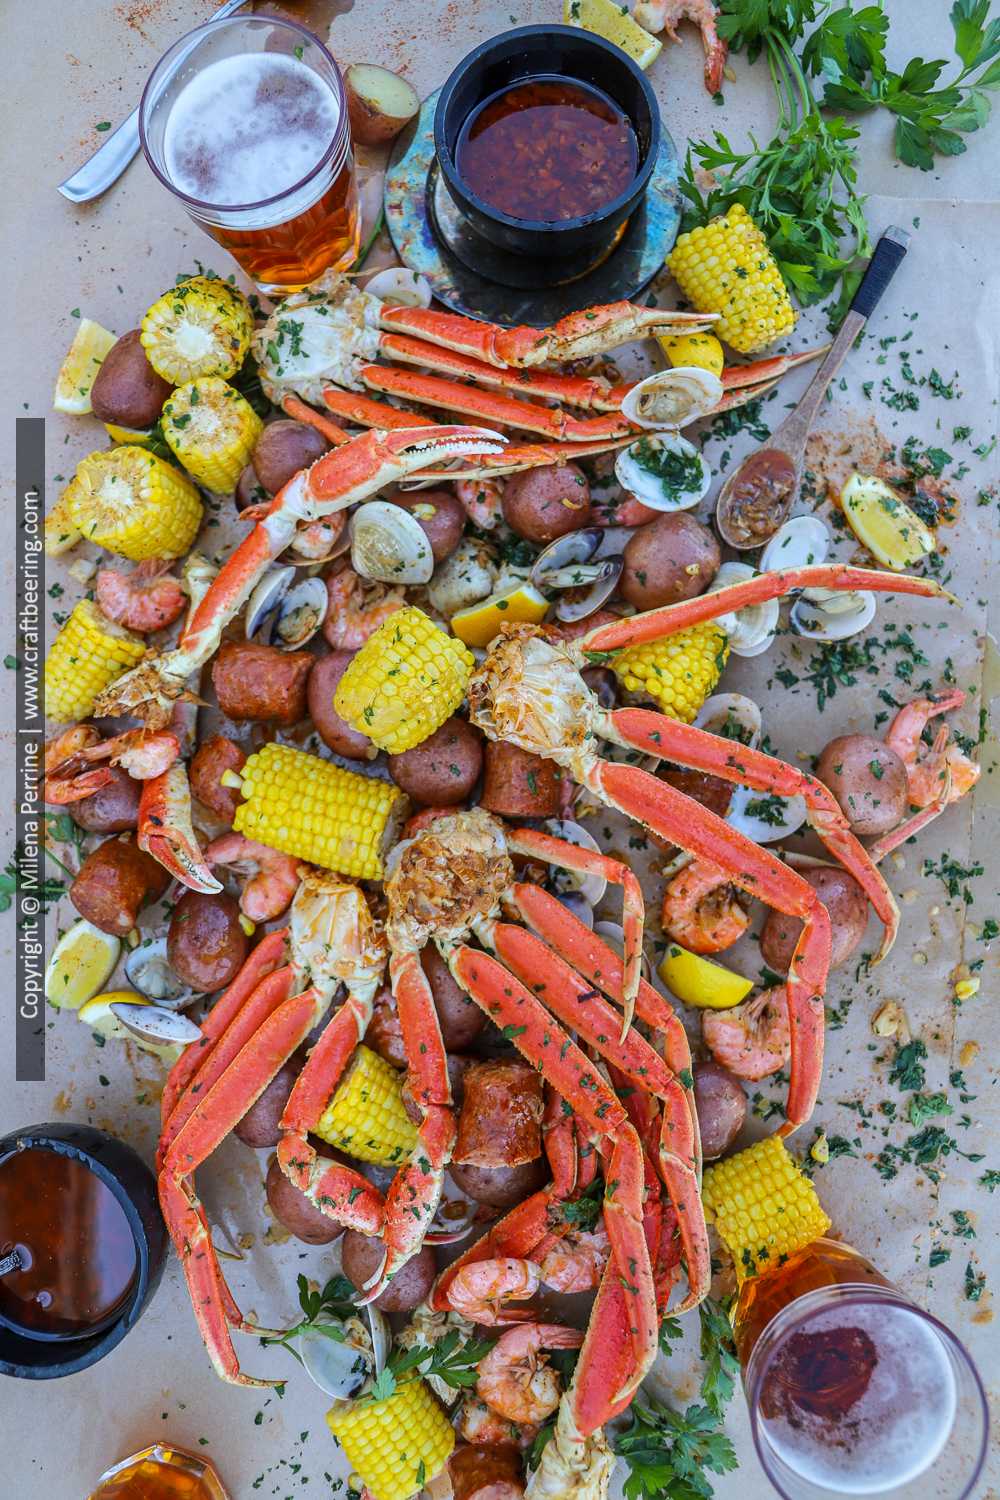 Seafood Boil in a Bag